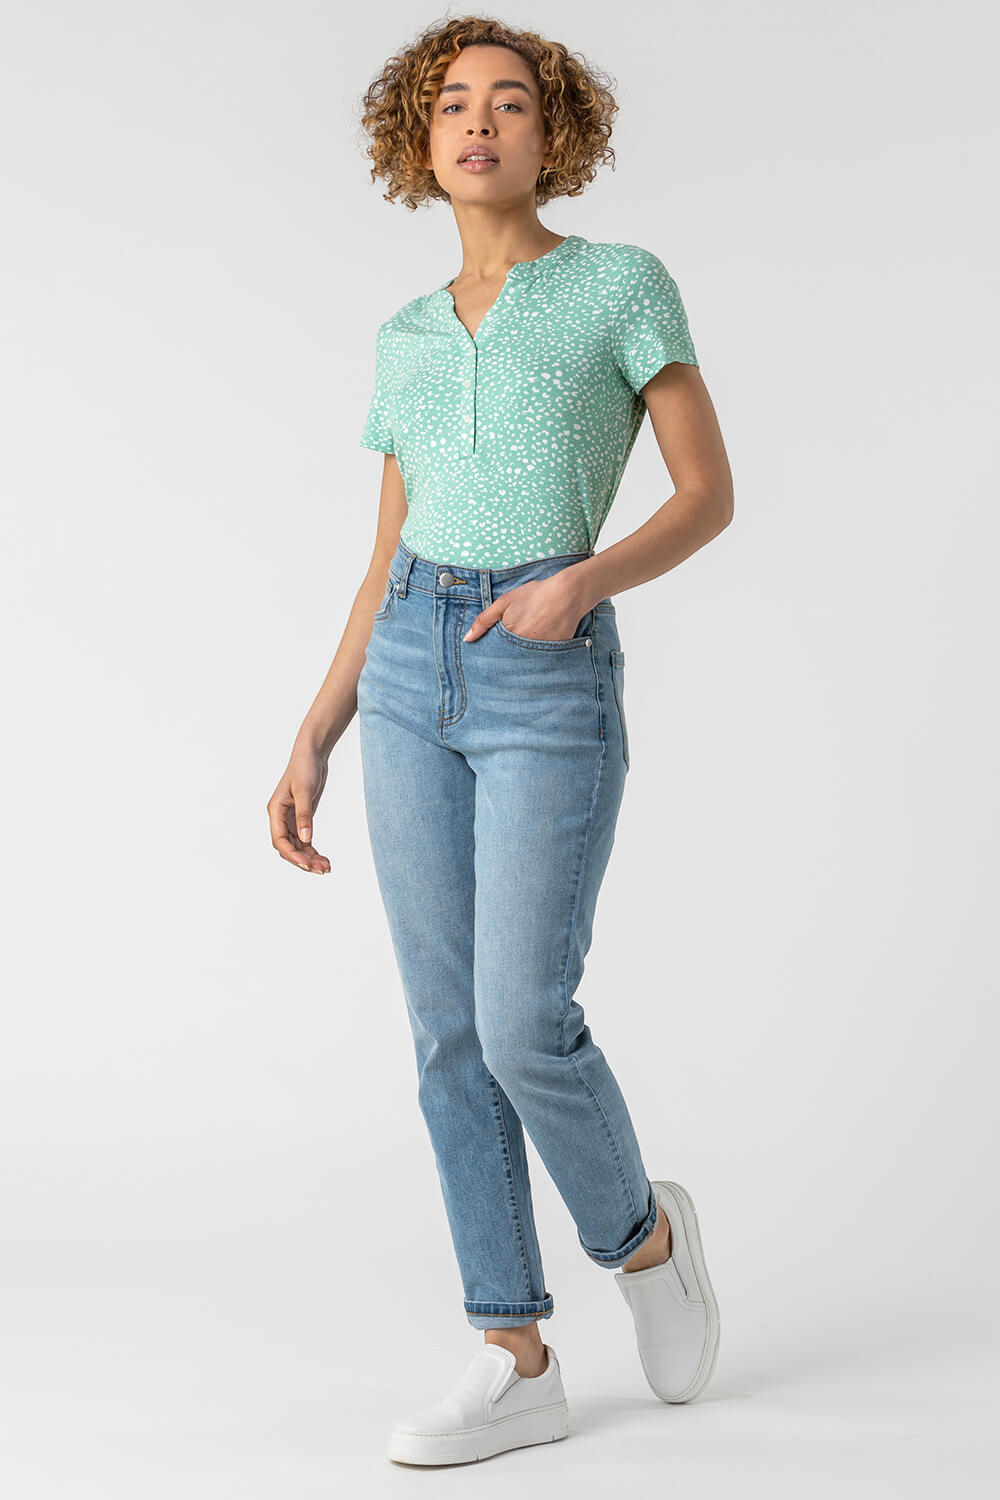 Mint Ditsy Spot Print Button Top, Image 4 of 5